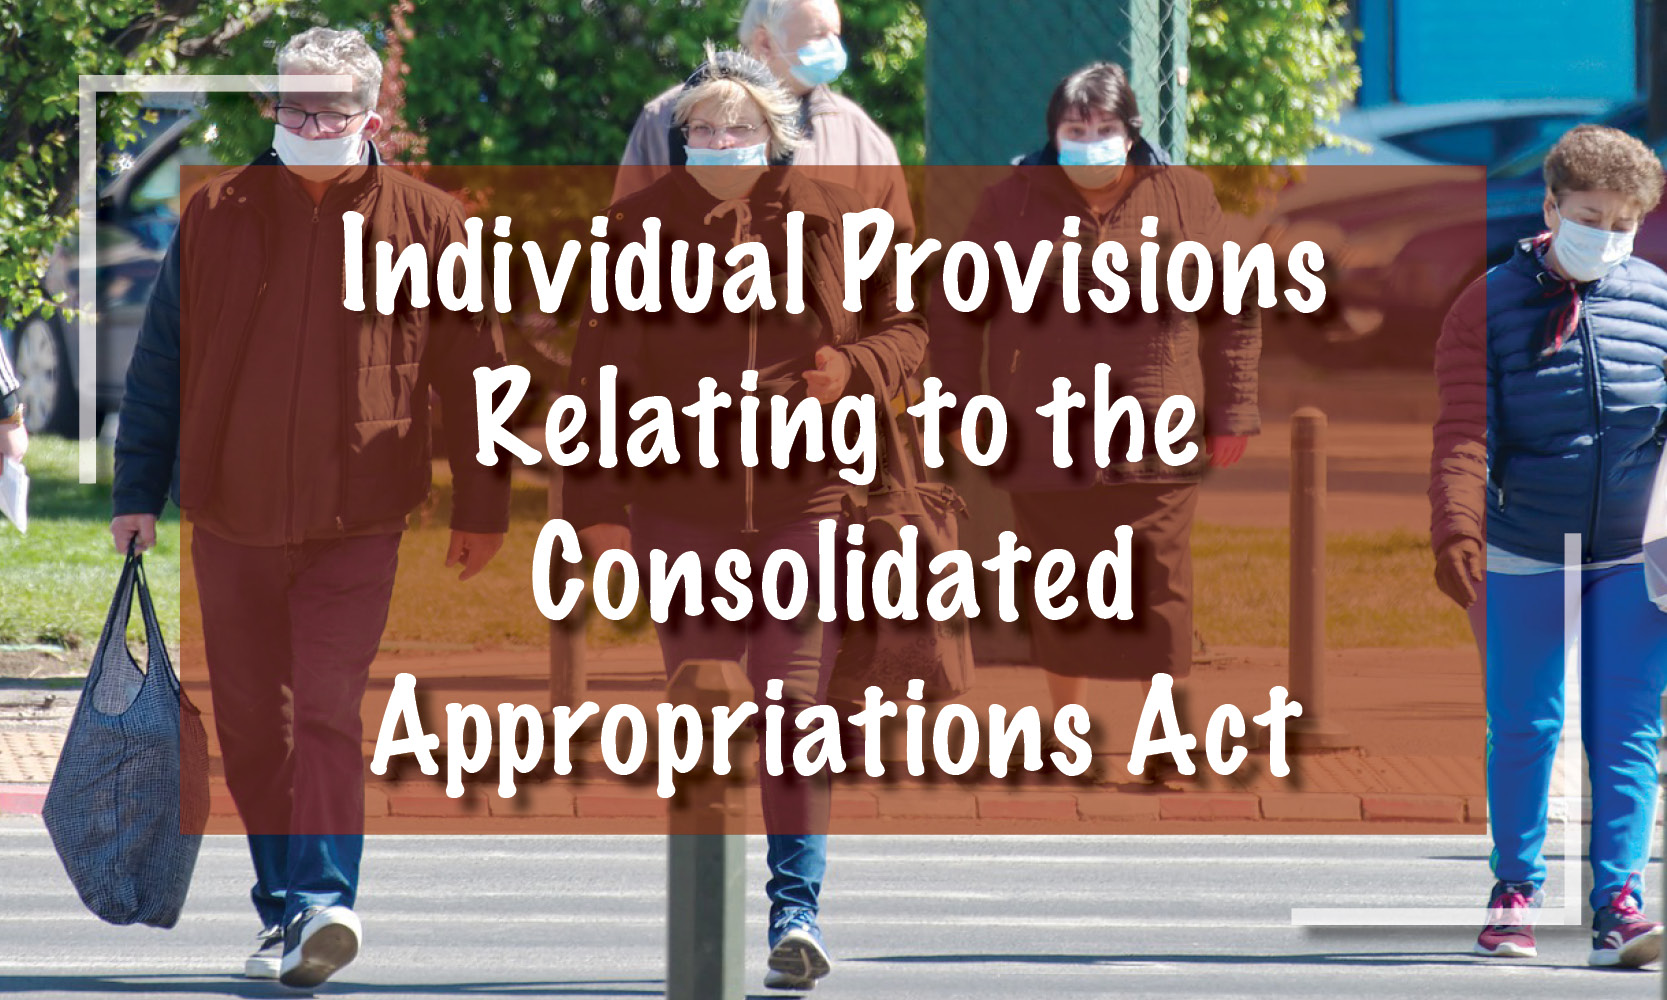 Individual Provisions Relating to the Consolidated Appropriations Act